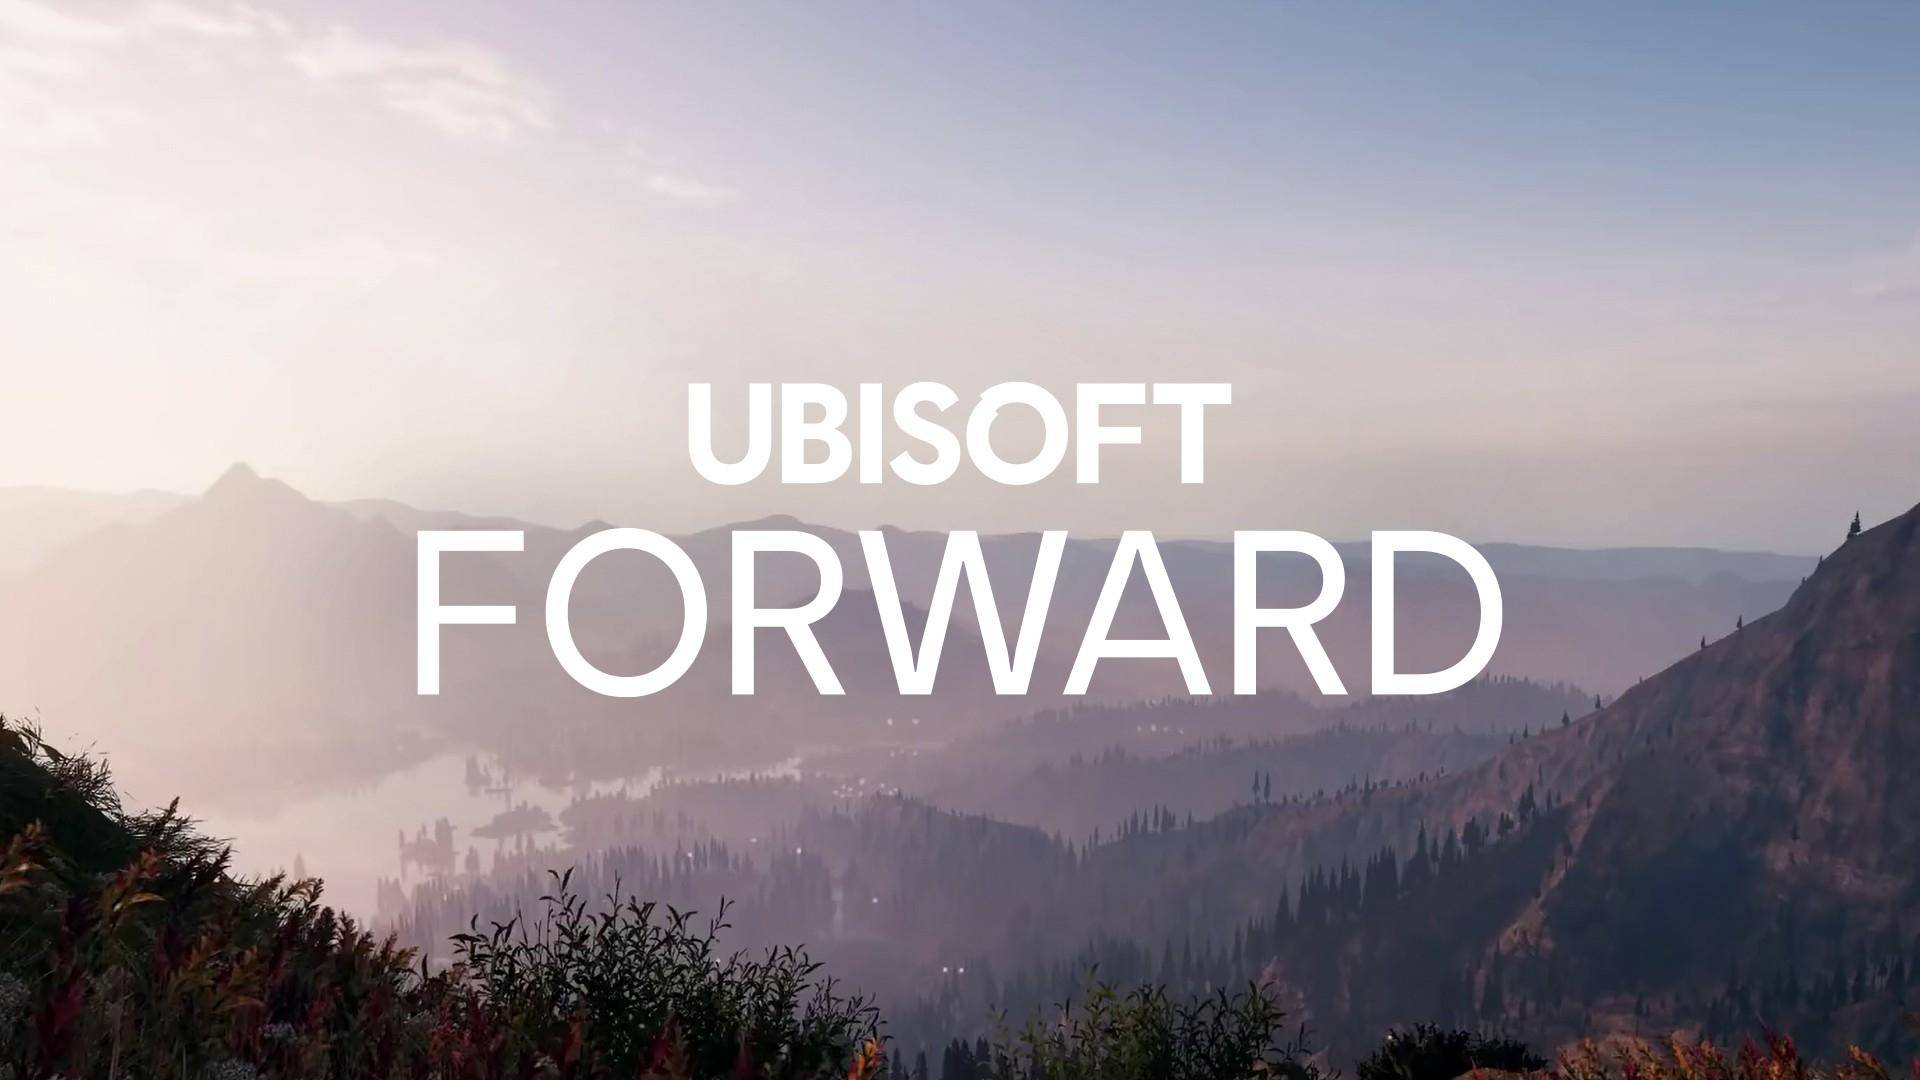 The second Ubisoft Forward will take place on September 10